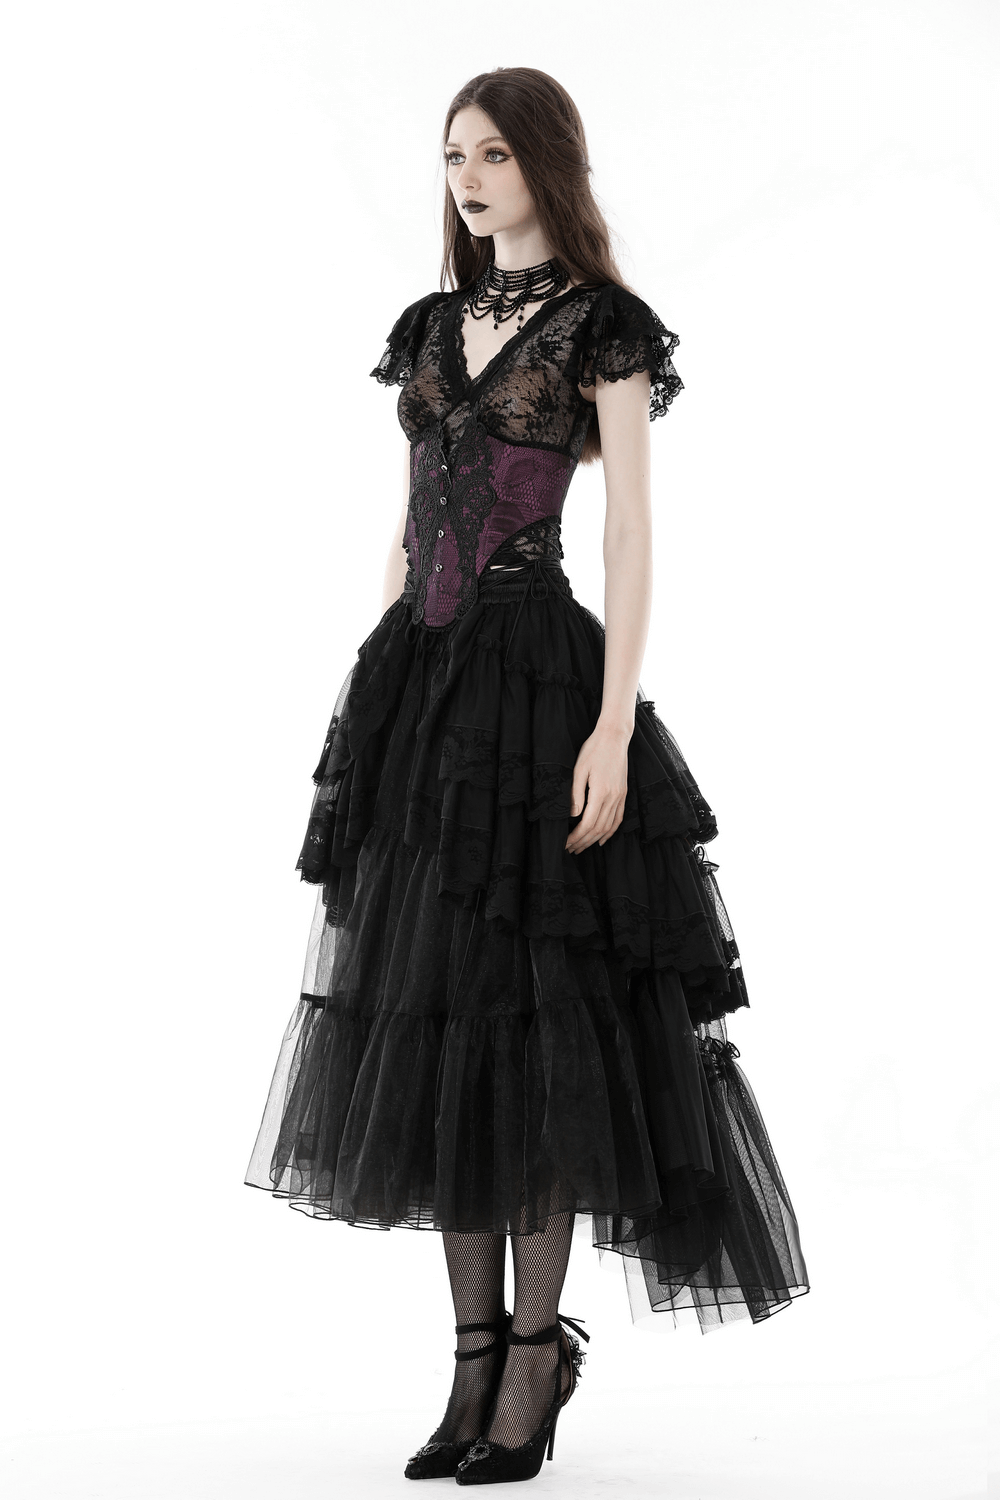 Dark Romantic Lace Crop Top - Gothic V-Neck Short Sleeves